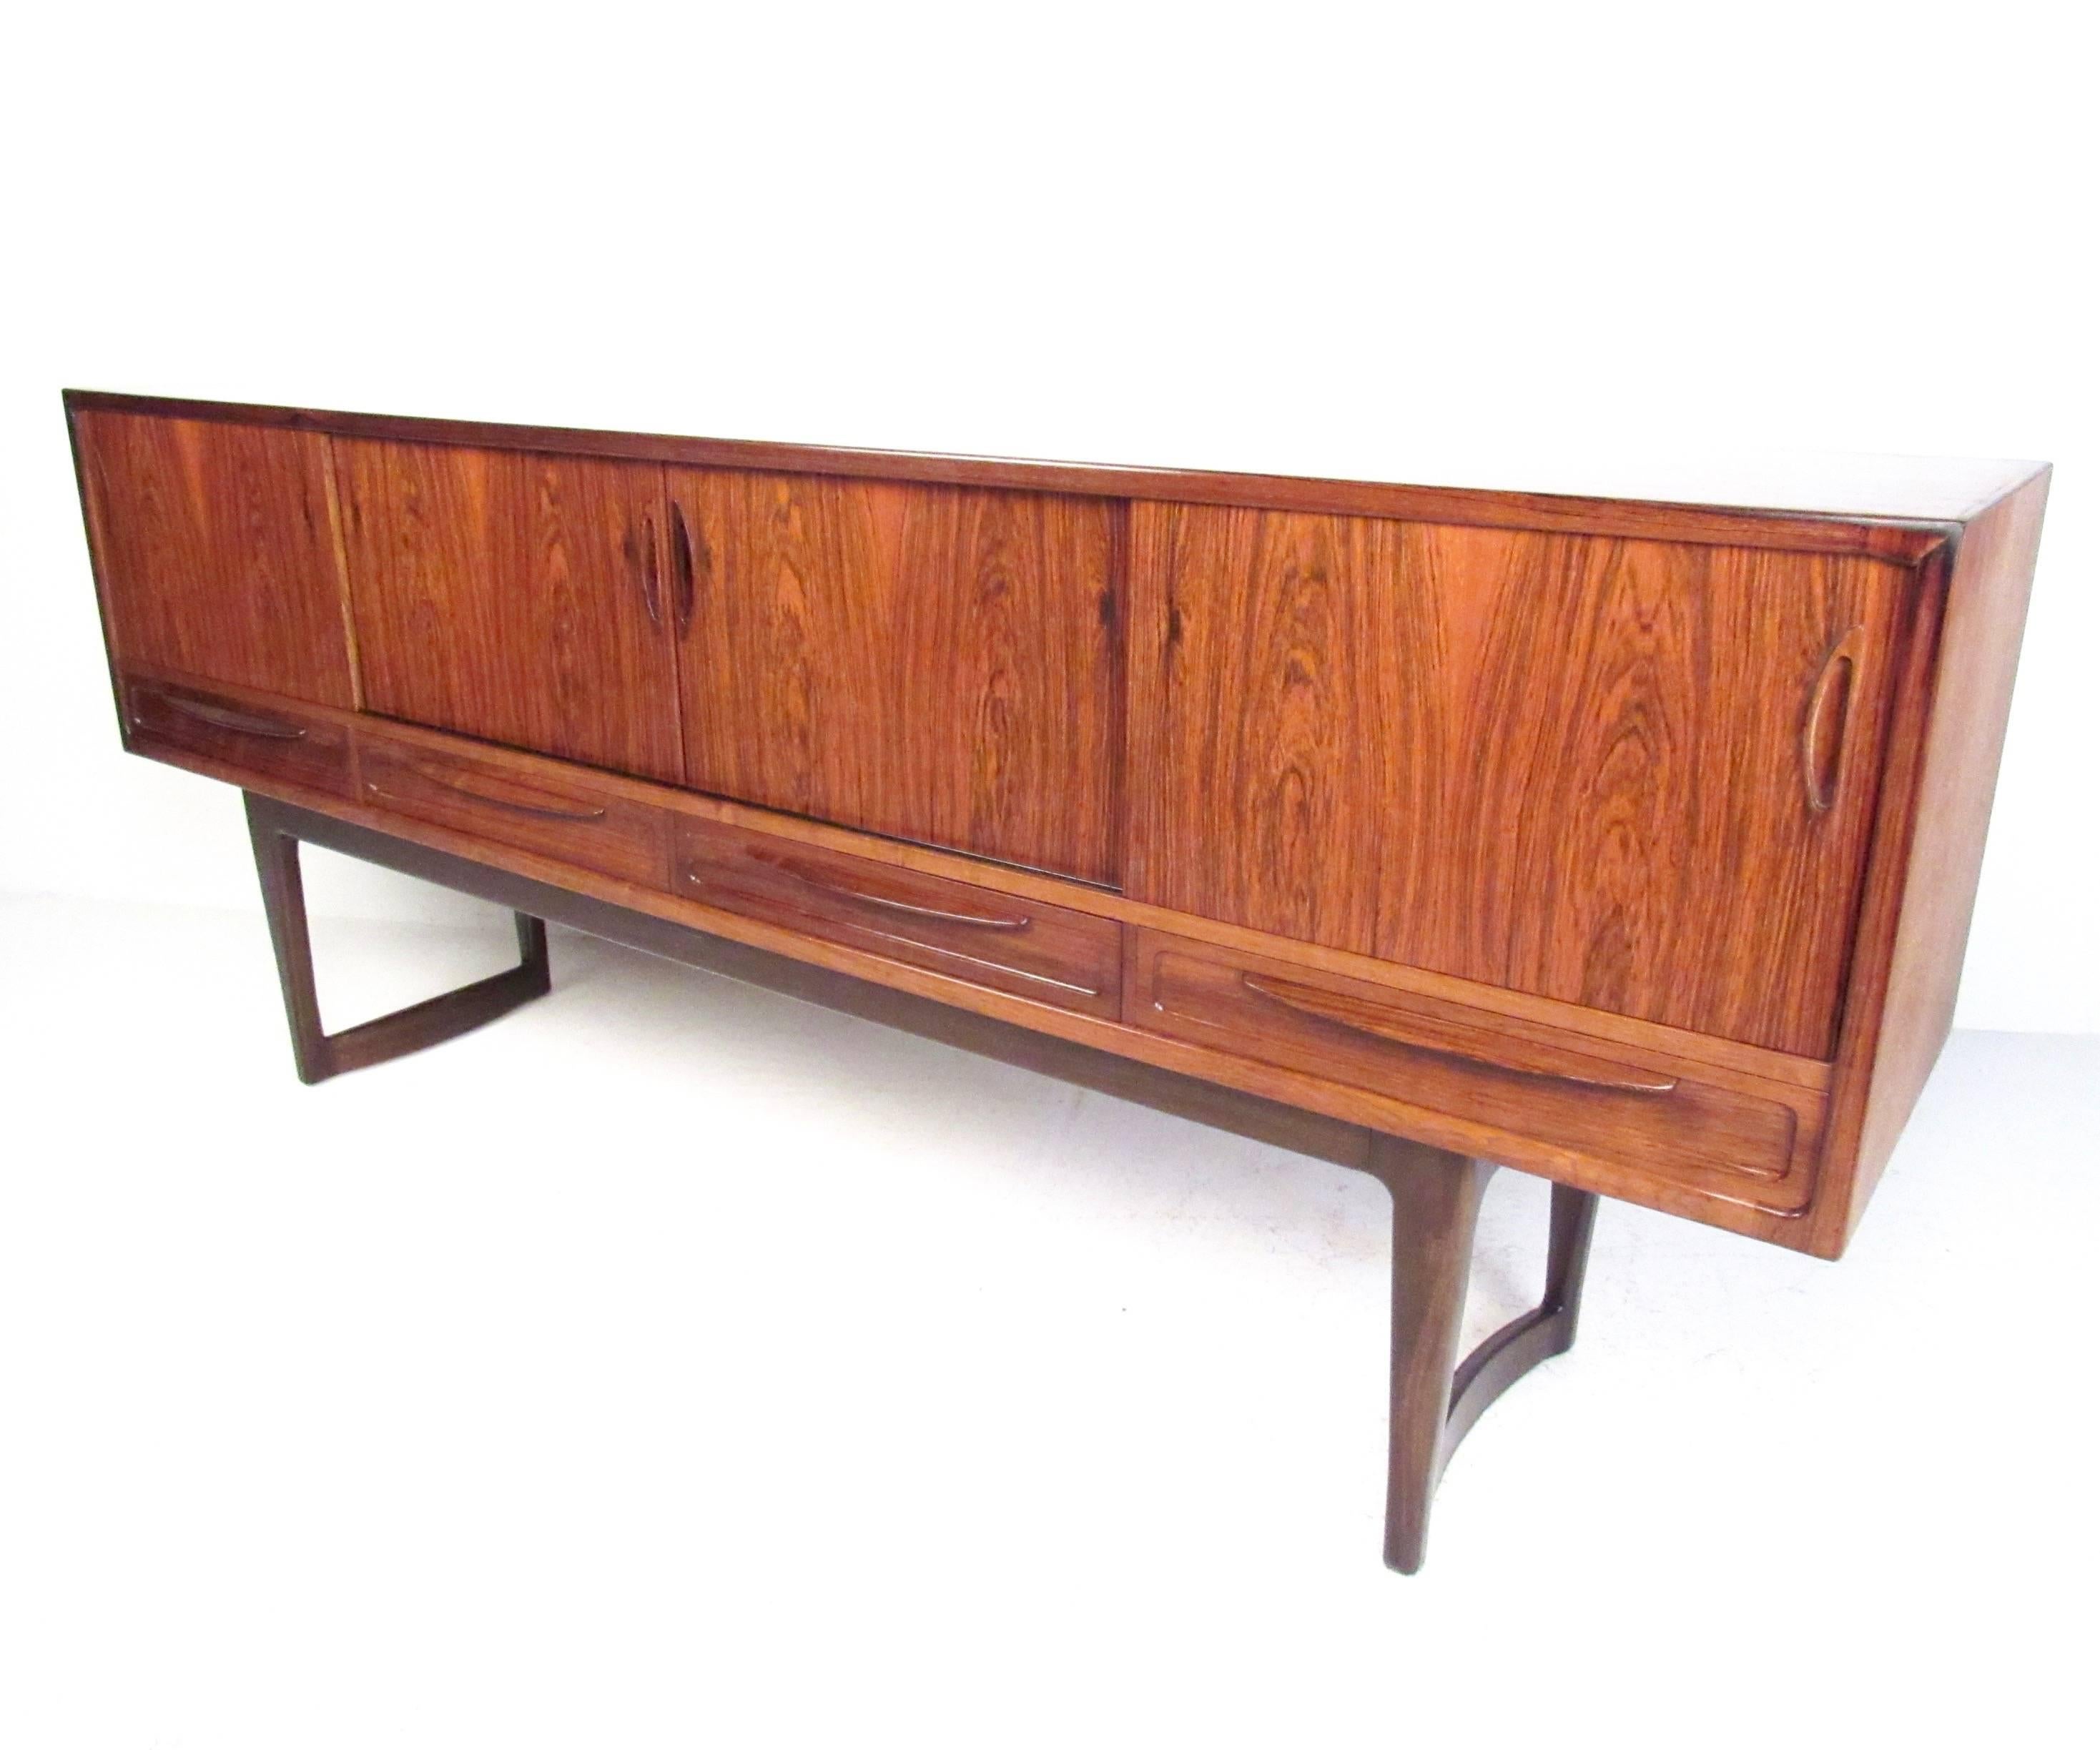 This gorgeous sled leg sideboard features stunning Mid-Century design, including sculpted handles, matched rosewood finish, and spacious storage. Felt-lined drawers and shelf storage cabinets make this the perfect piece for dining room, living room,